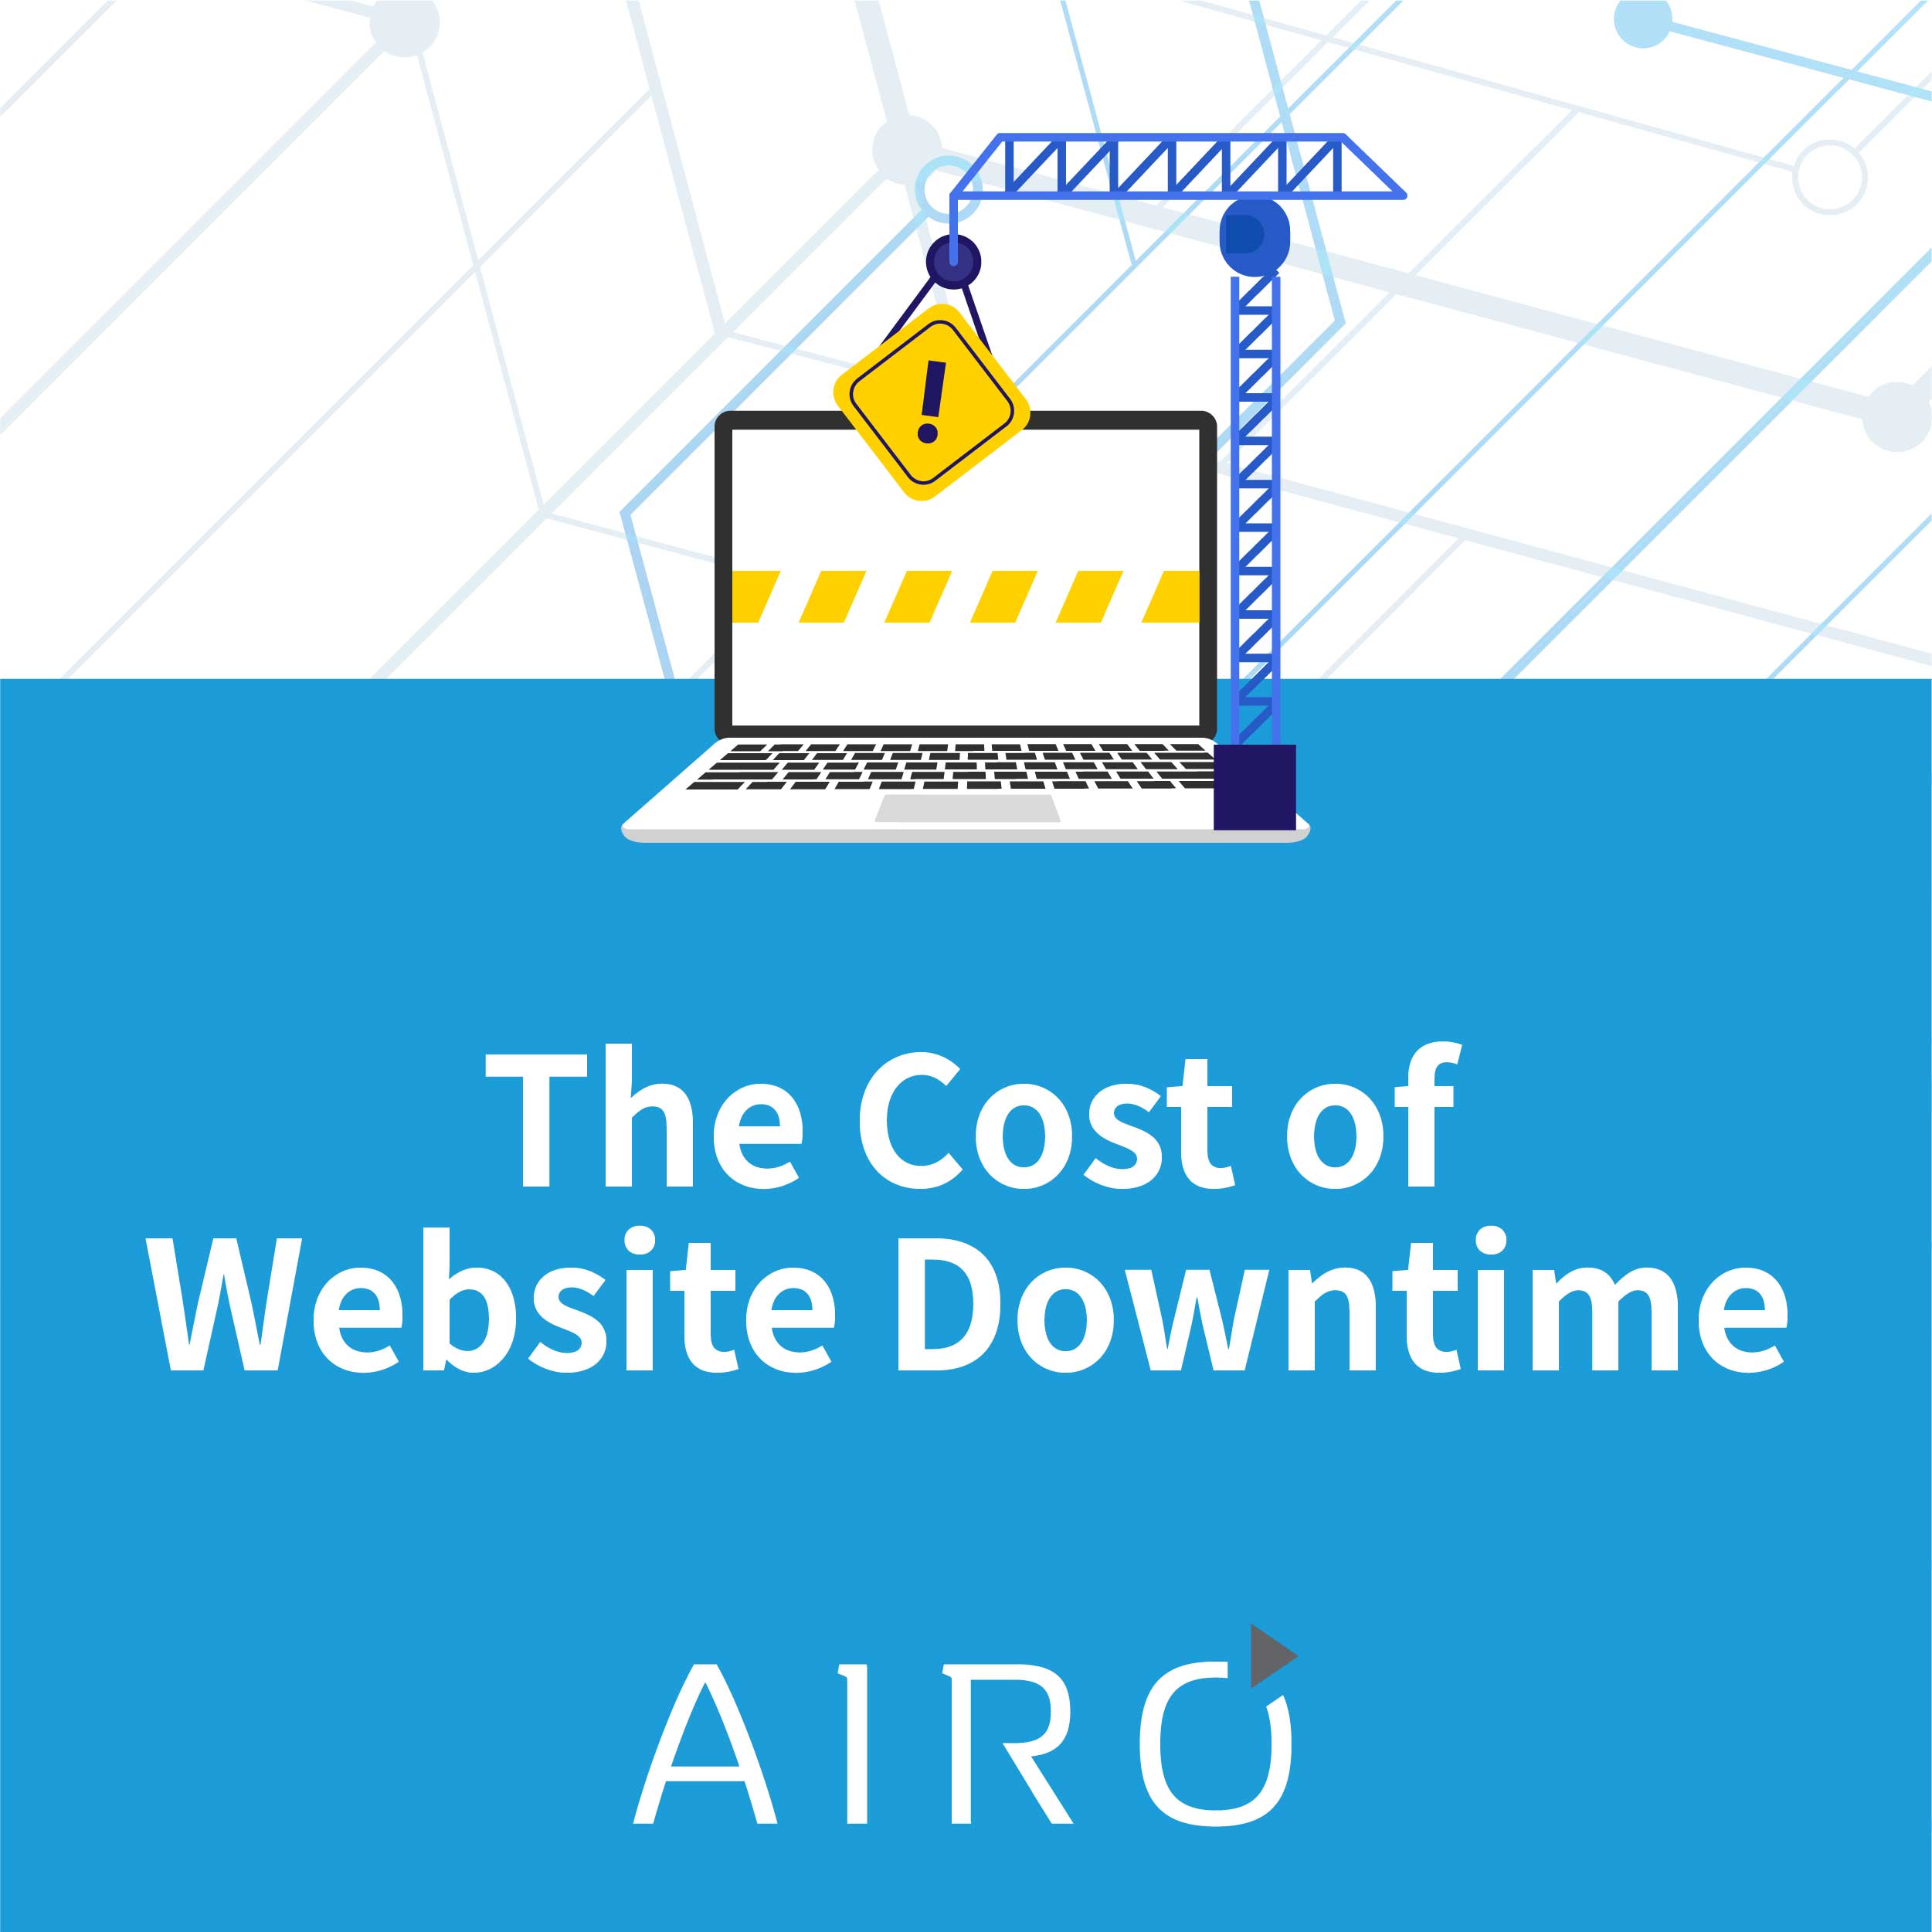 The Cost of Website Downtime